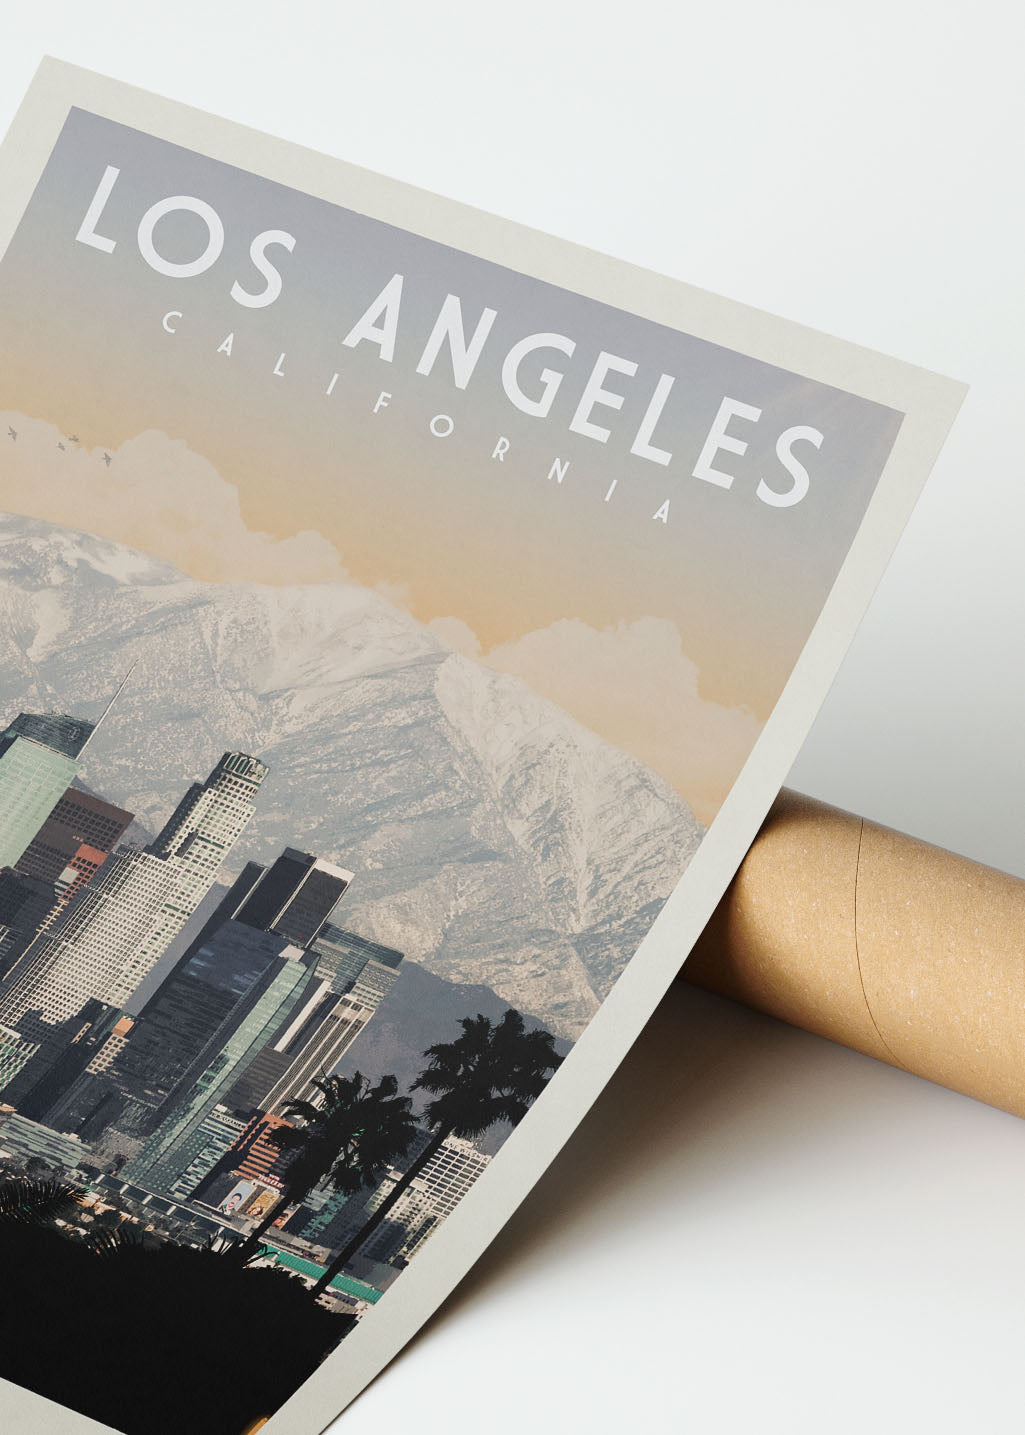 NEW TRAVEL BOOK: LOS ANGELES